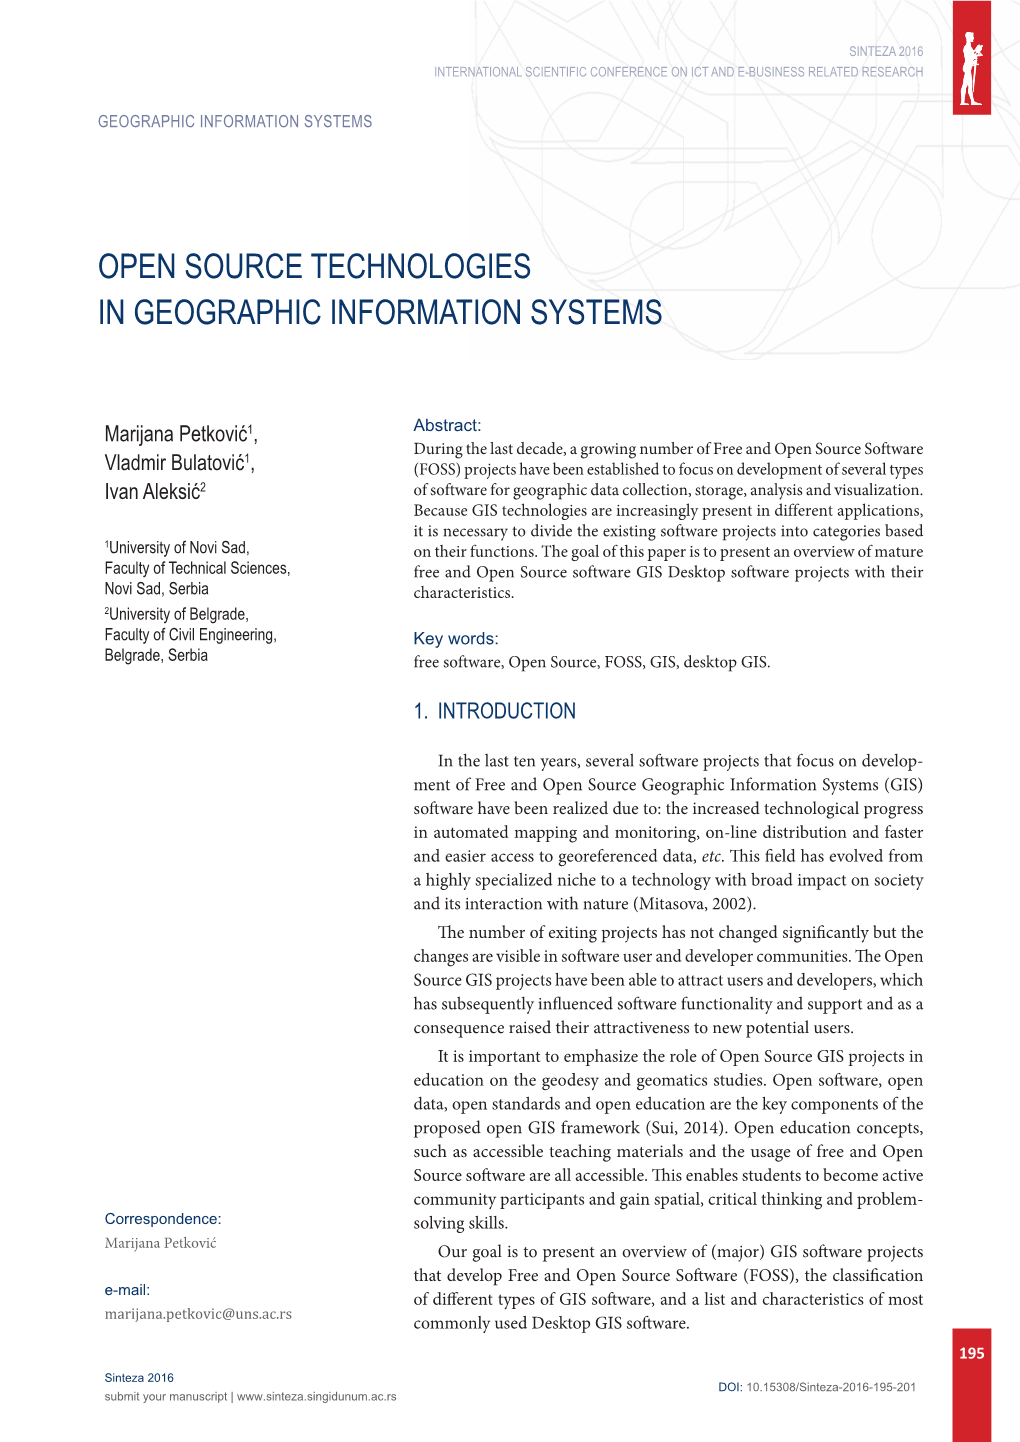 Open Source Technologies in Geographic Information Systems